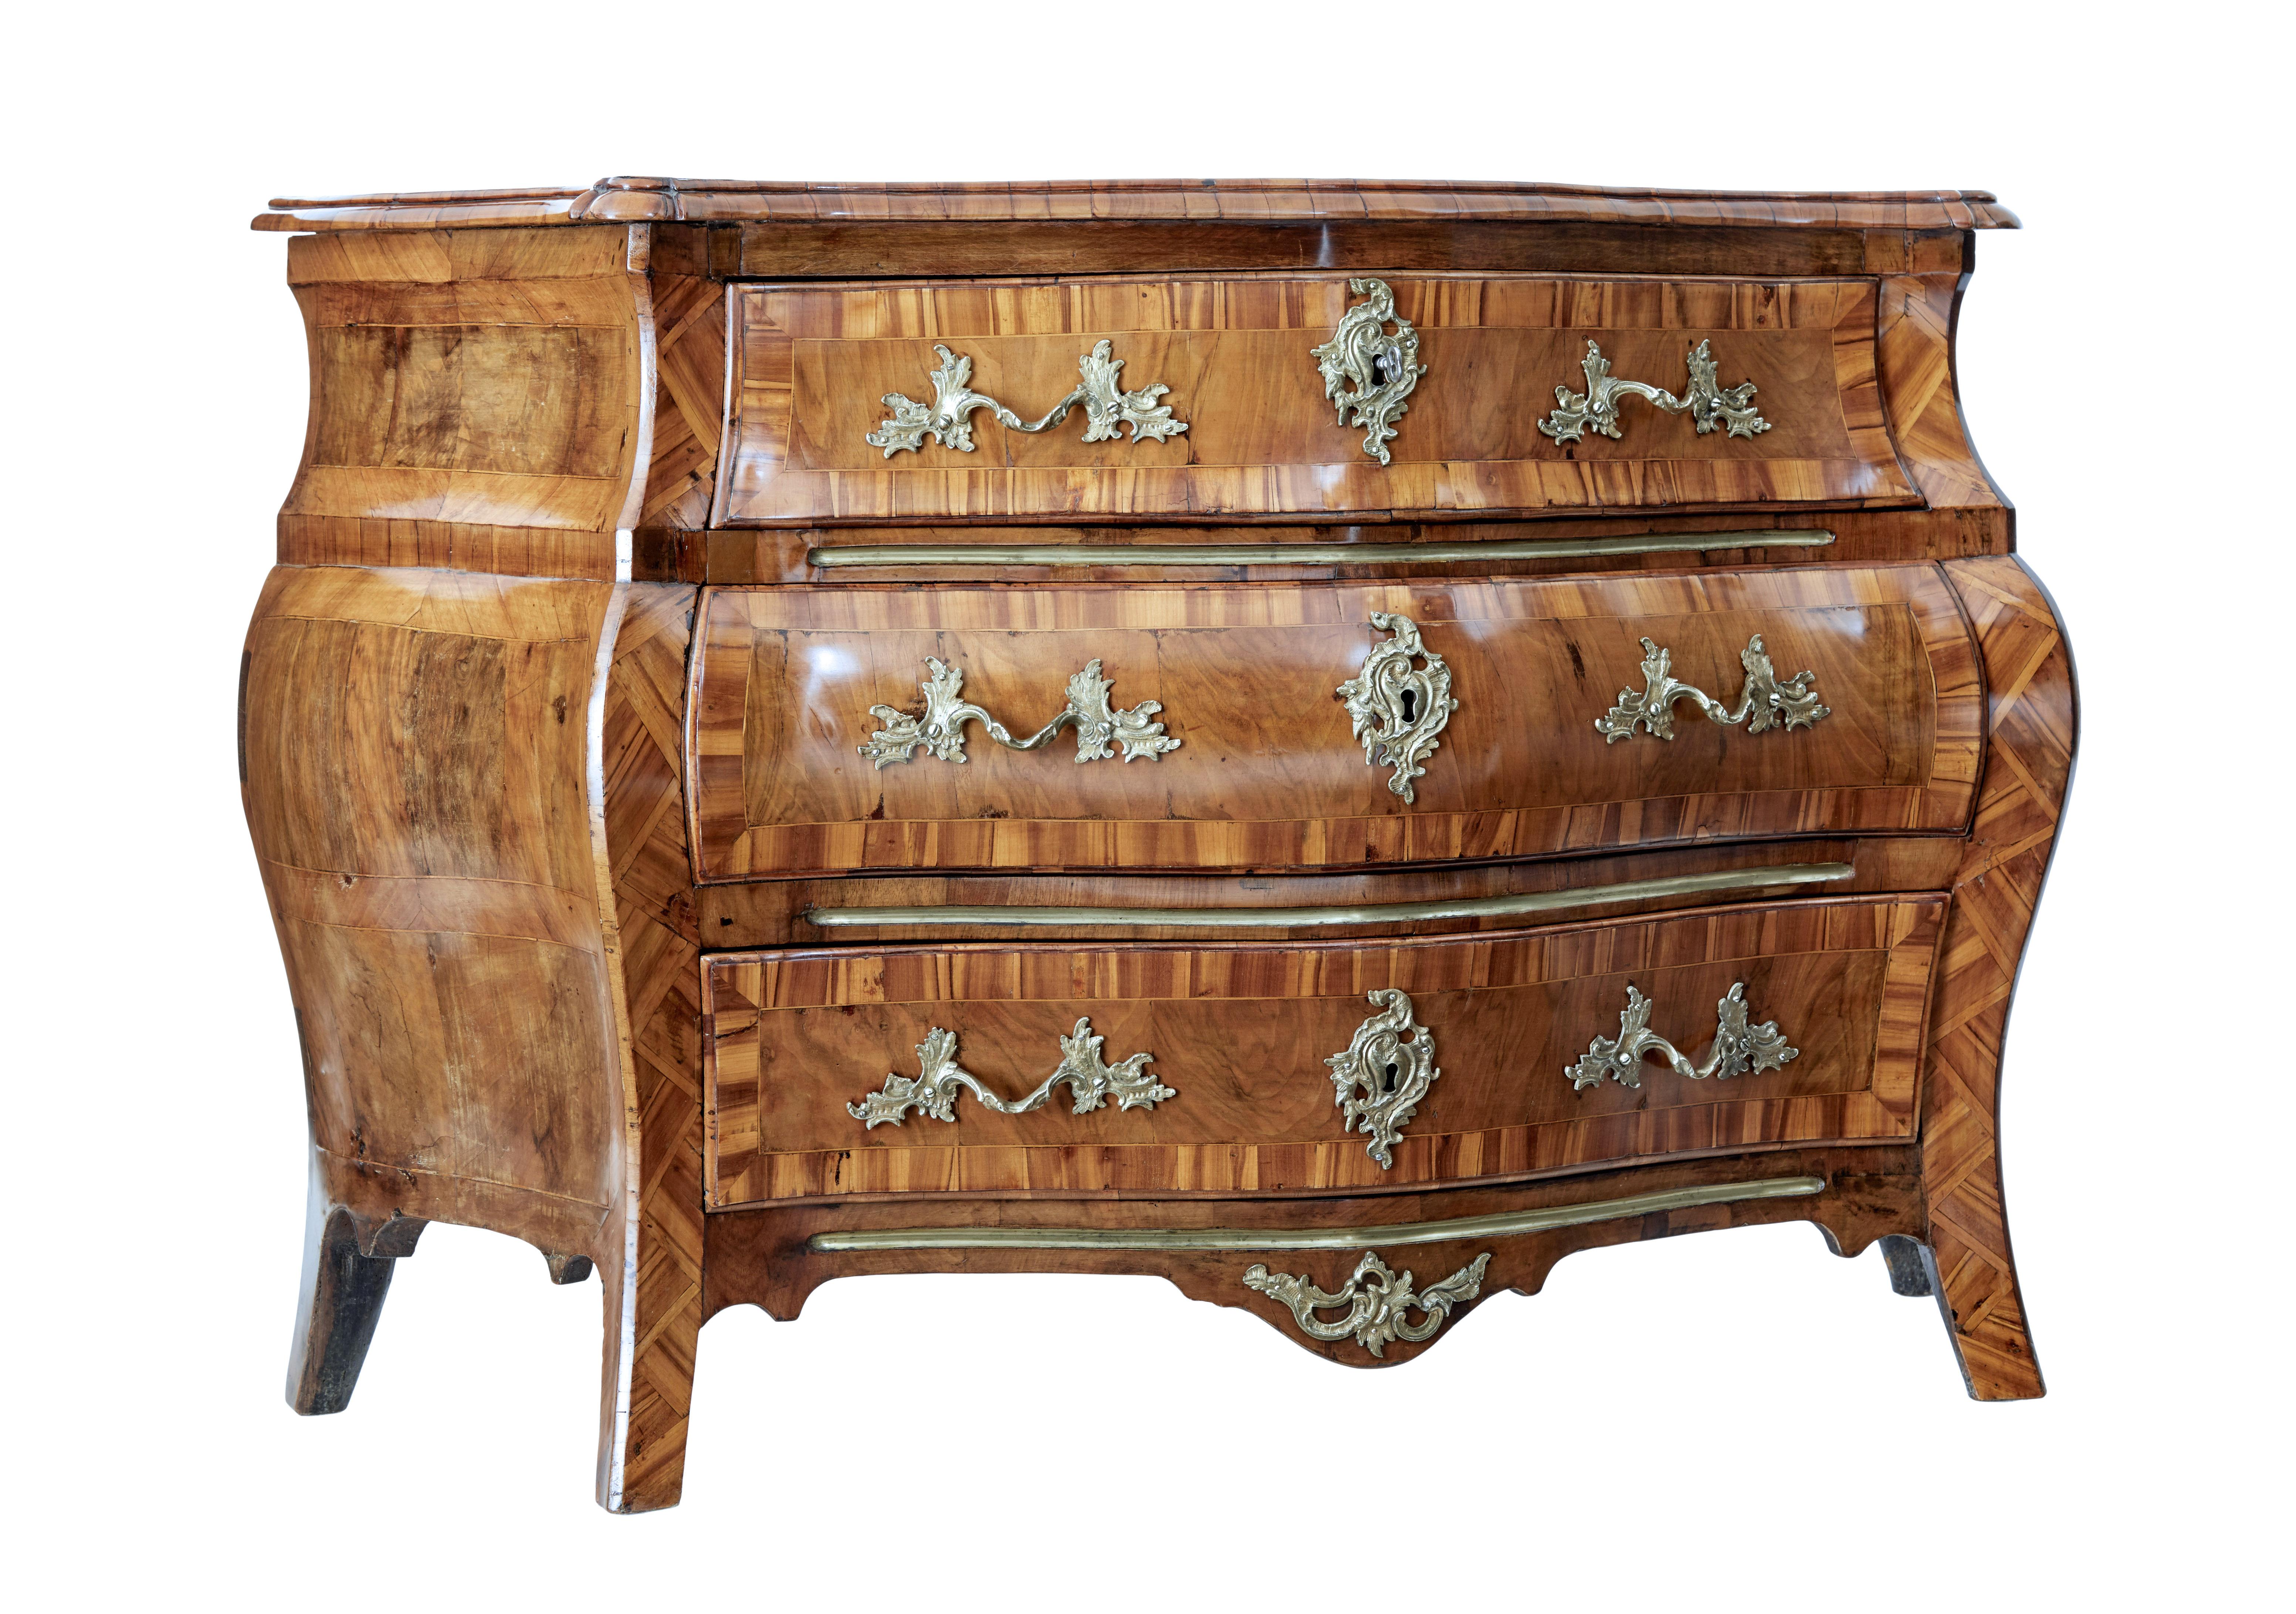 Early 19th century inlaid walnut bombe chest of drawers circa 1800.

Fine quality Swedish rococo revival commode with the typical bombe shape of bulging out in the middle and curving in at the base.

Shaped walnut top surface with patches to